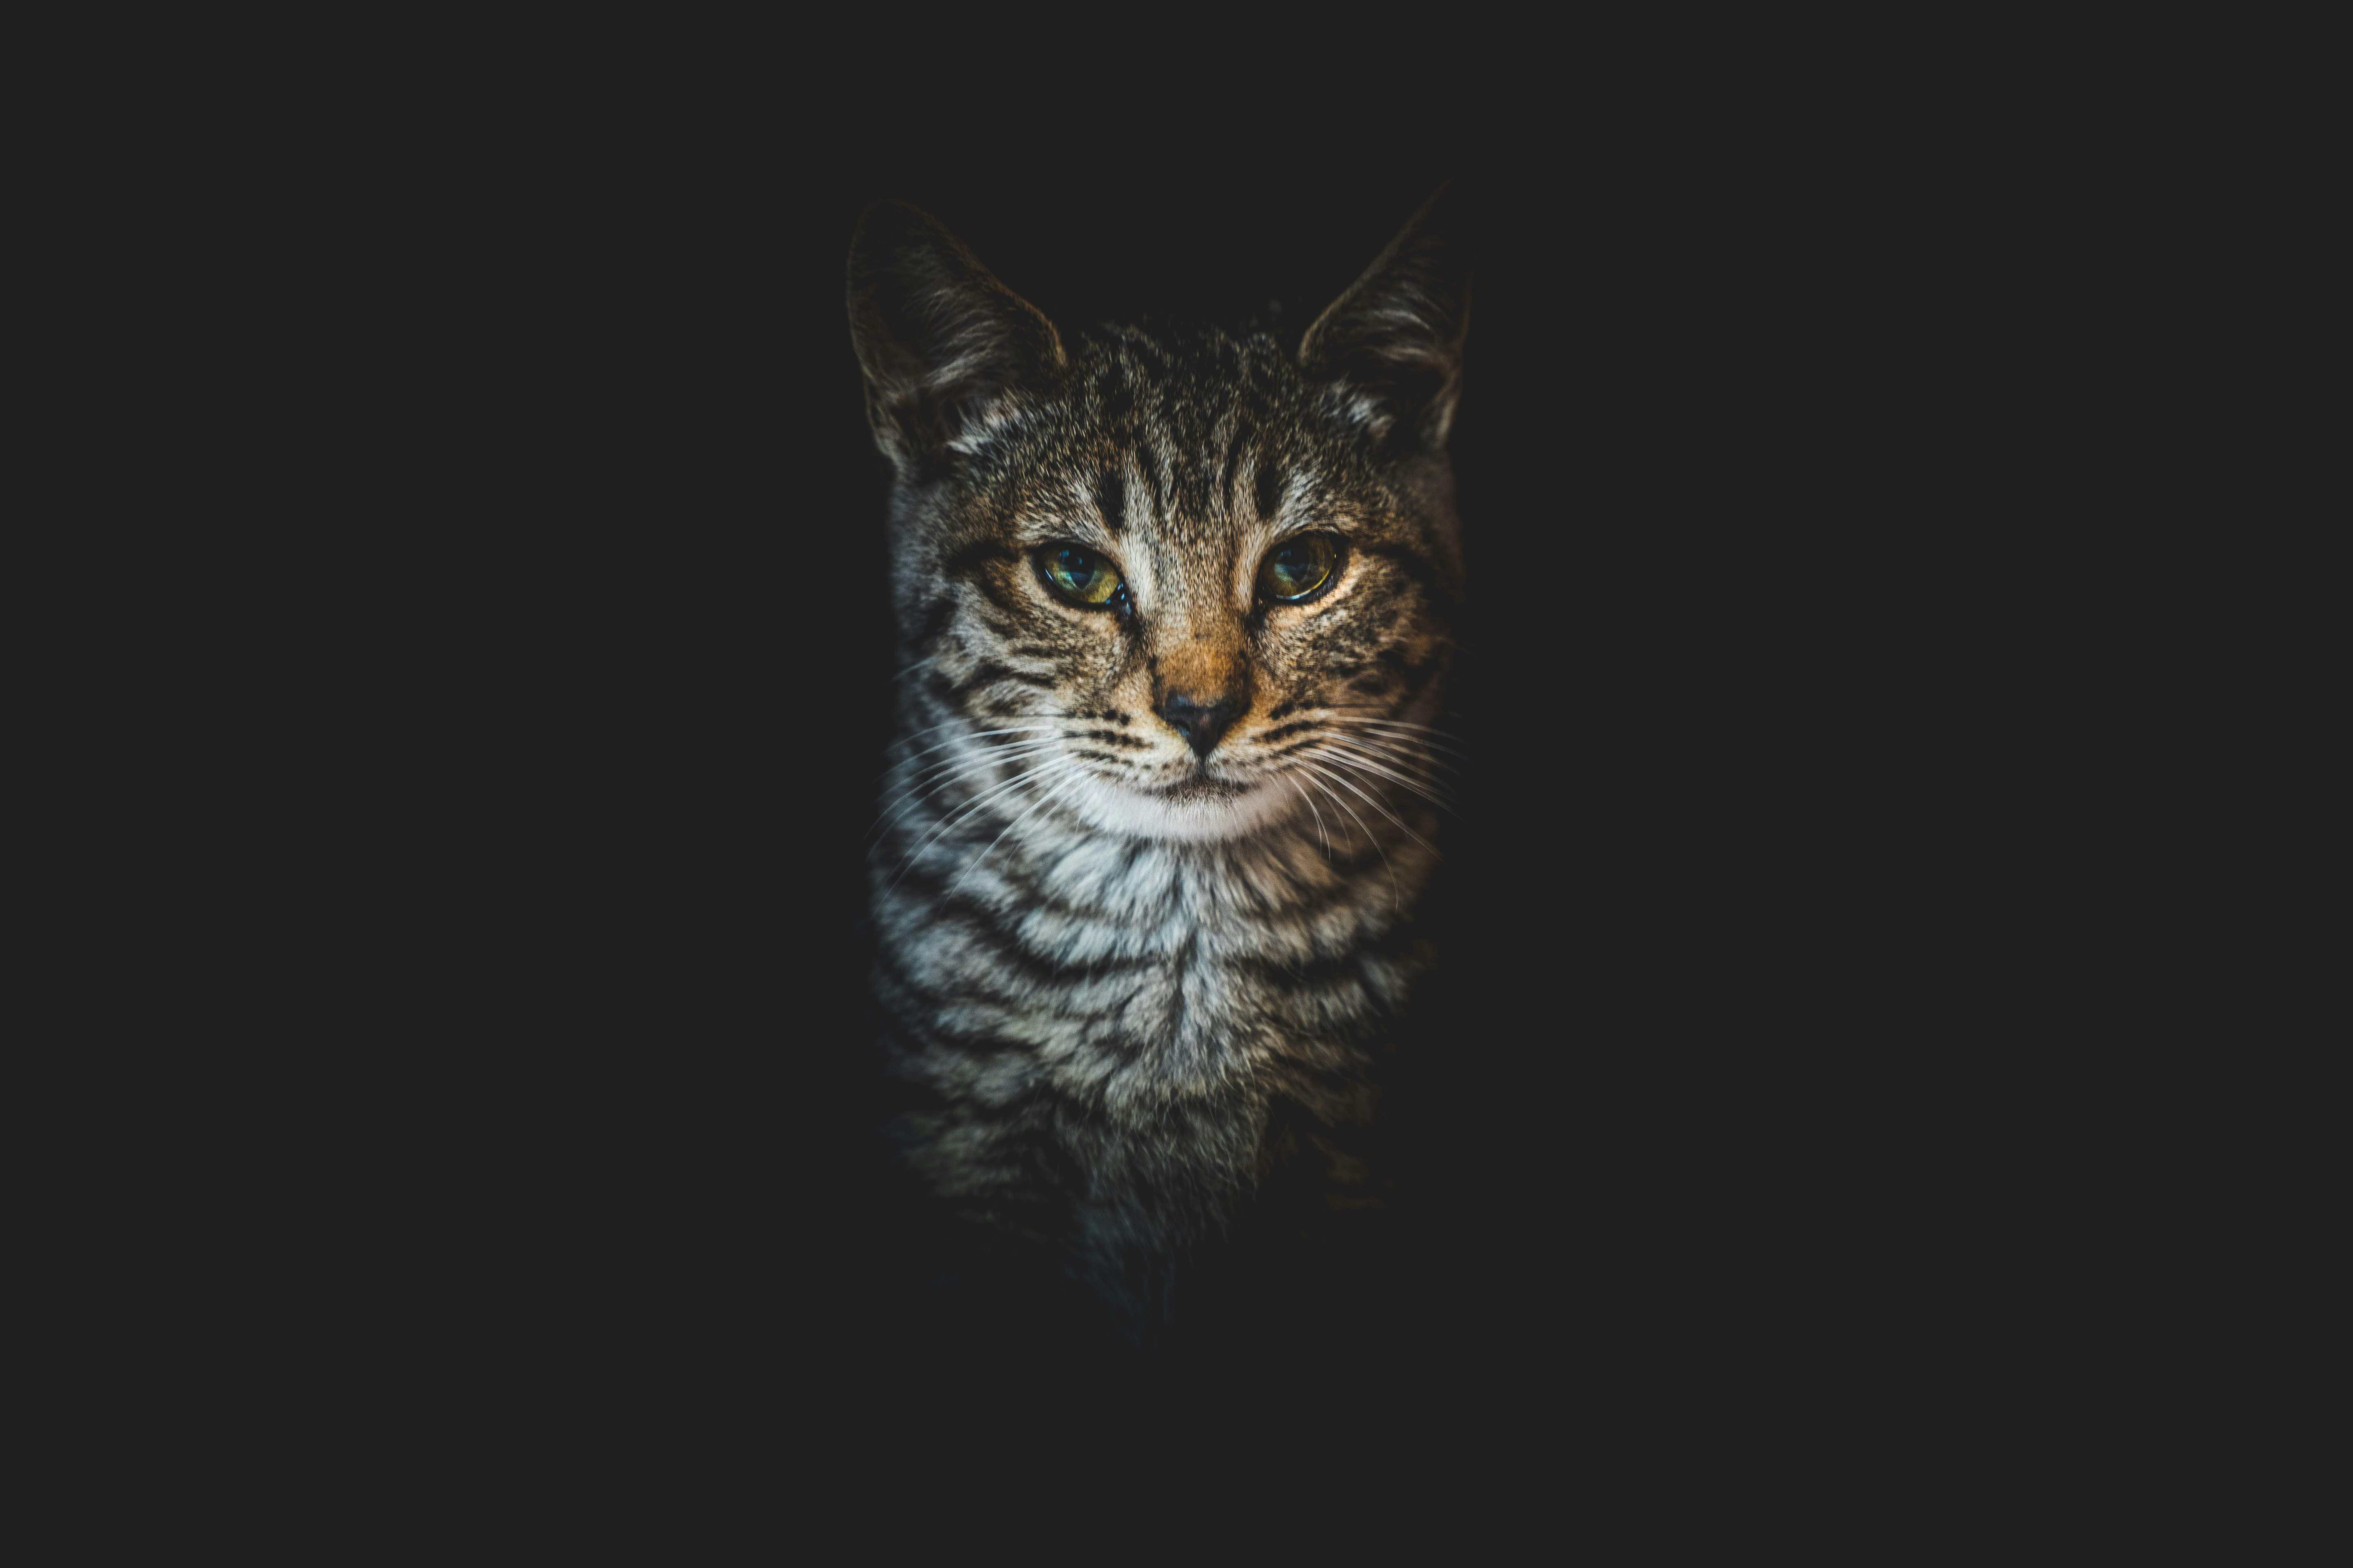 brown tabby cat in black background